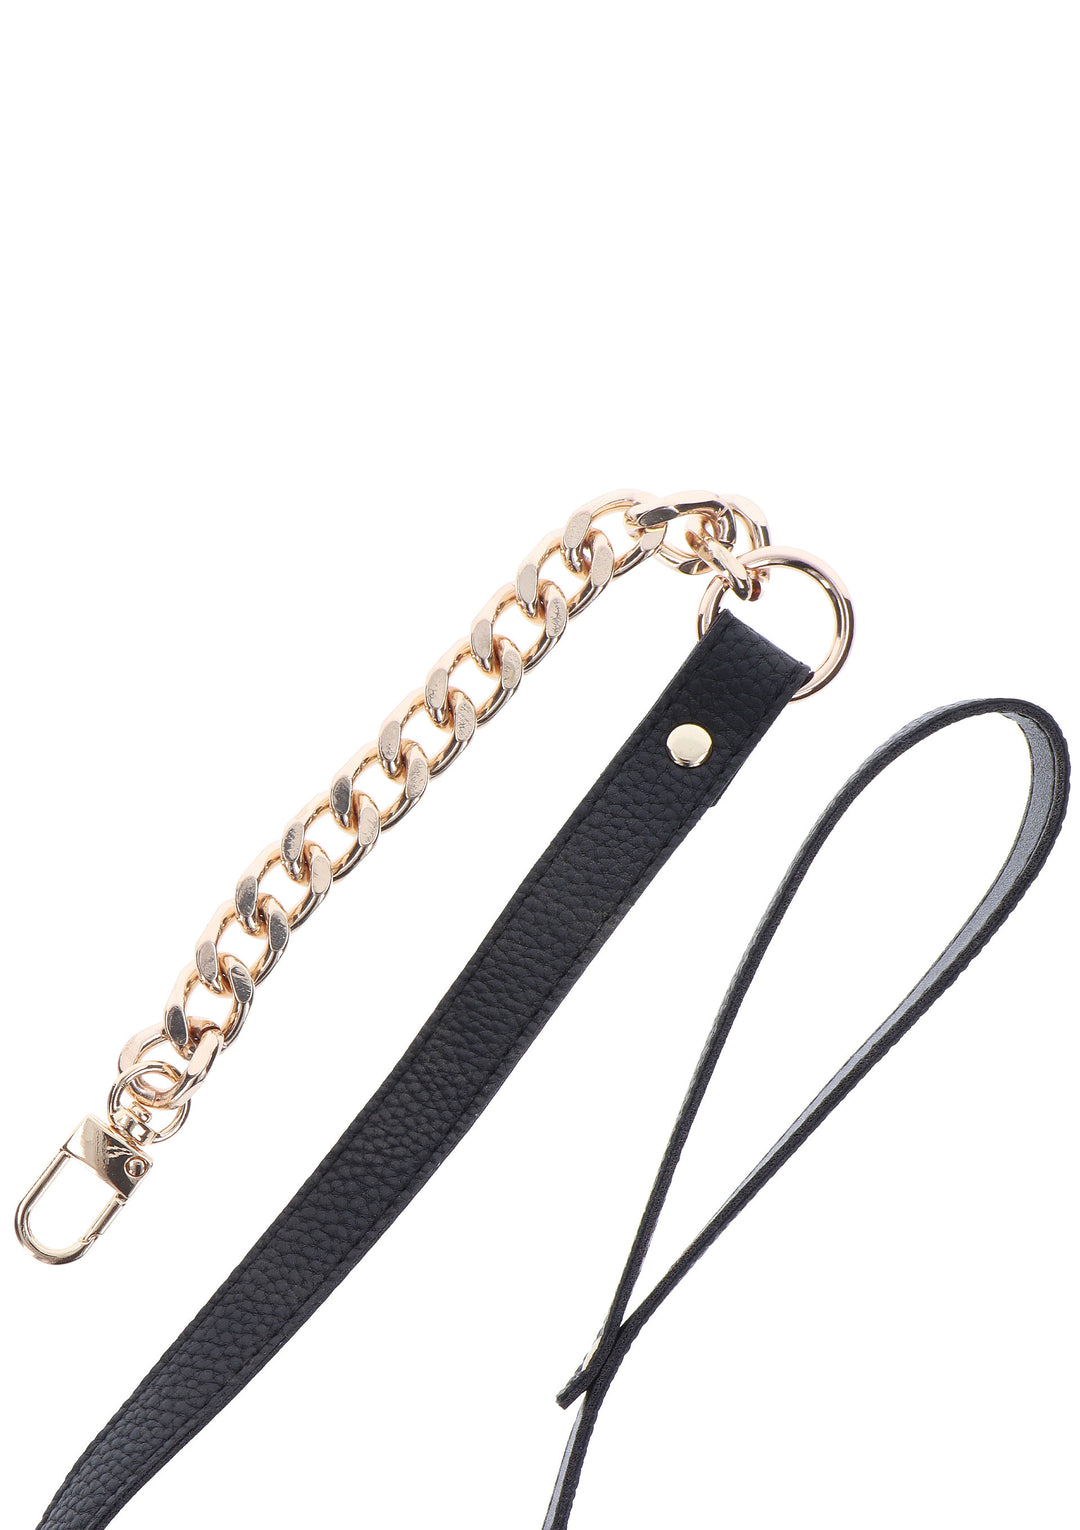 Statement collar and leash